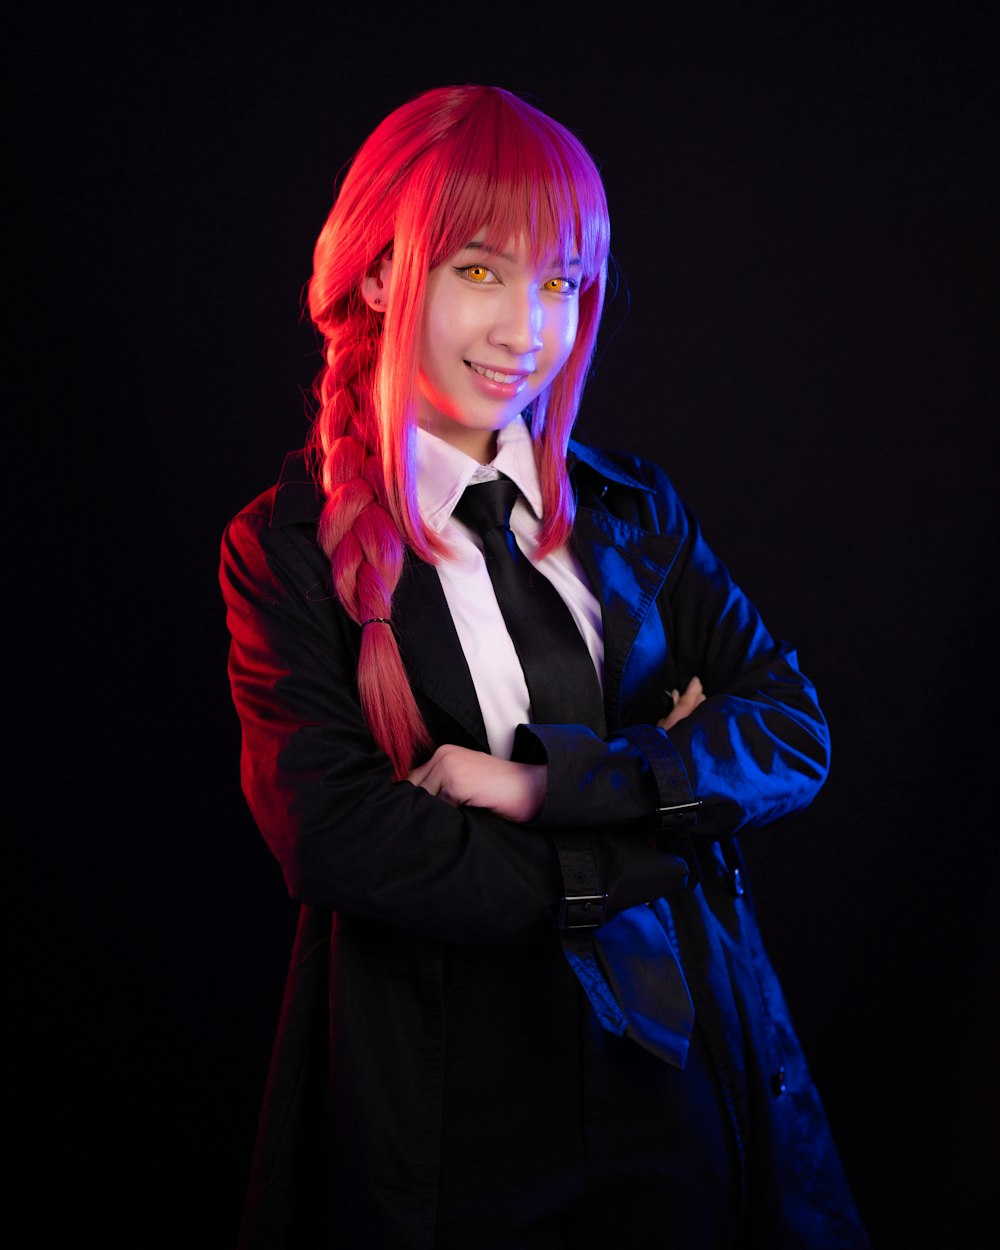 a woman with red hair wearing a black jacket and tie